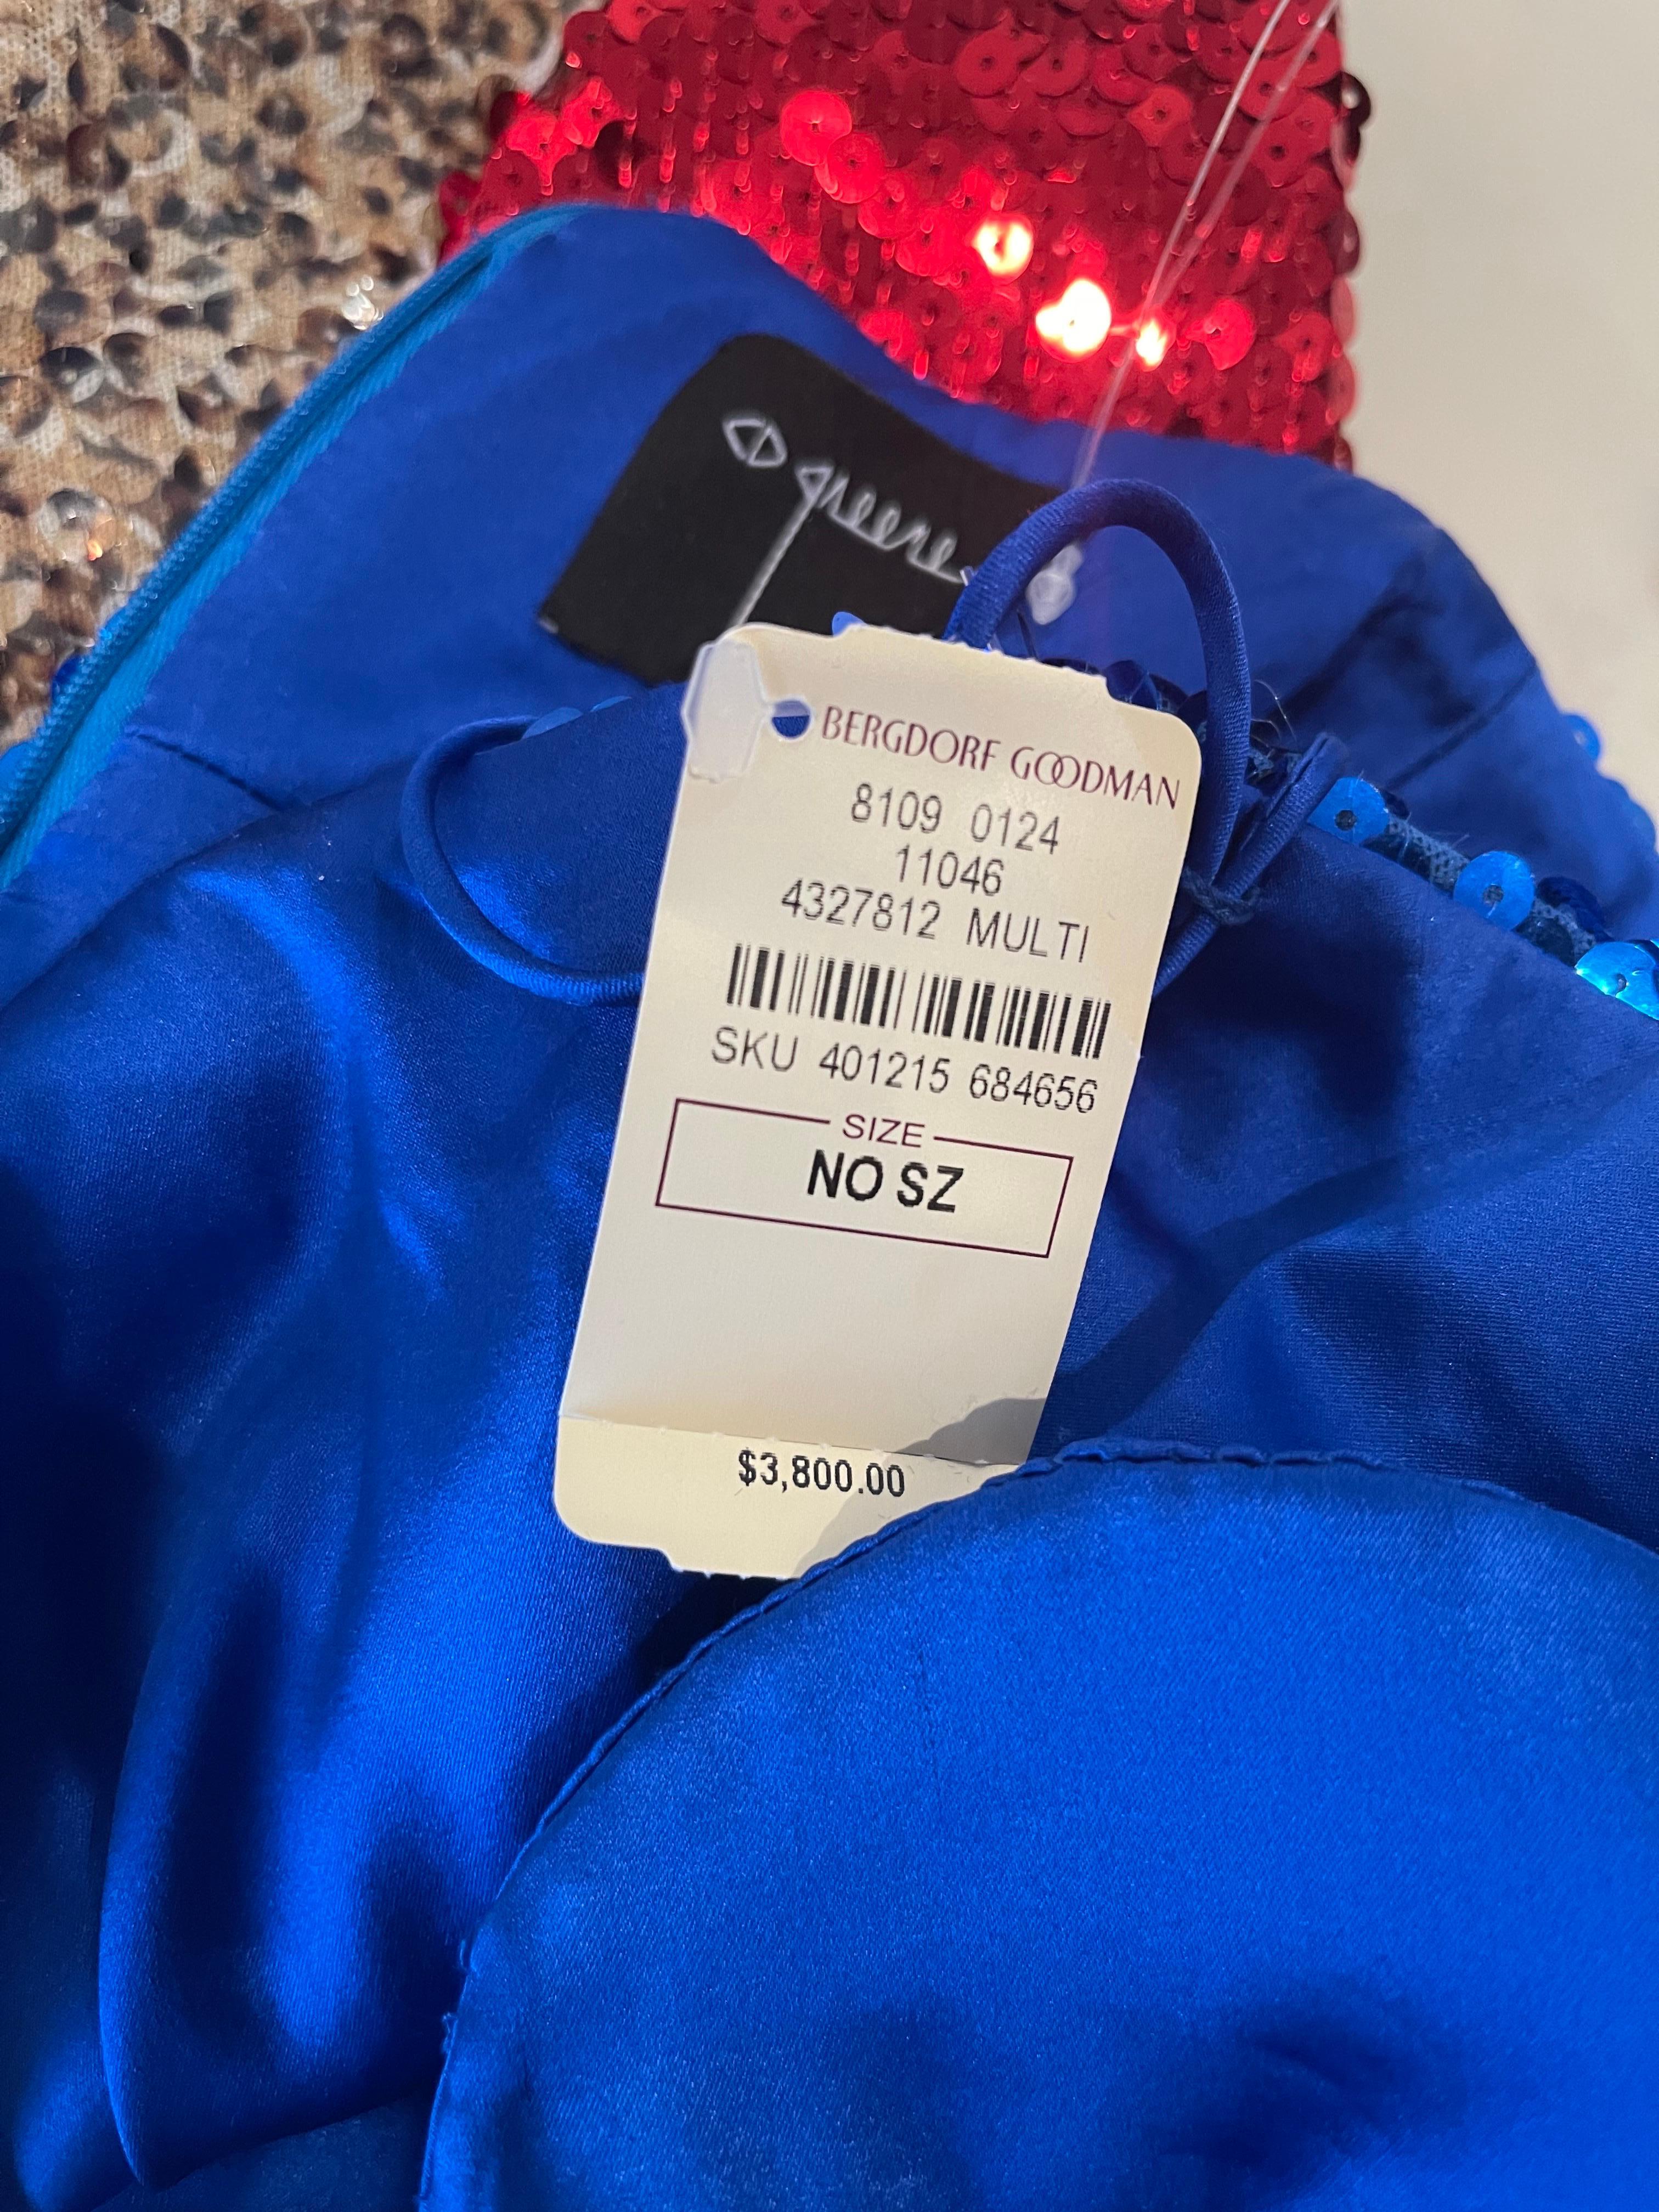 Beautiful brand new 2000s C.D. GREENE dress, with original $3,800 Bergdorf Goodman price tag still attached. Royal blue, with purple, gold and red bulls eye on the side. Hidden zipper up the back with hook-and-eye closure. Incredible amount of time